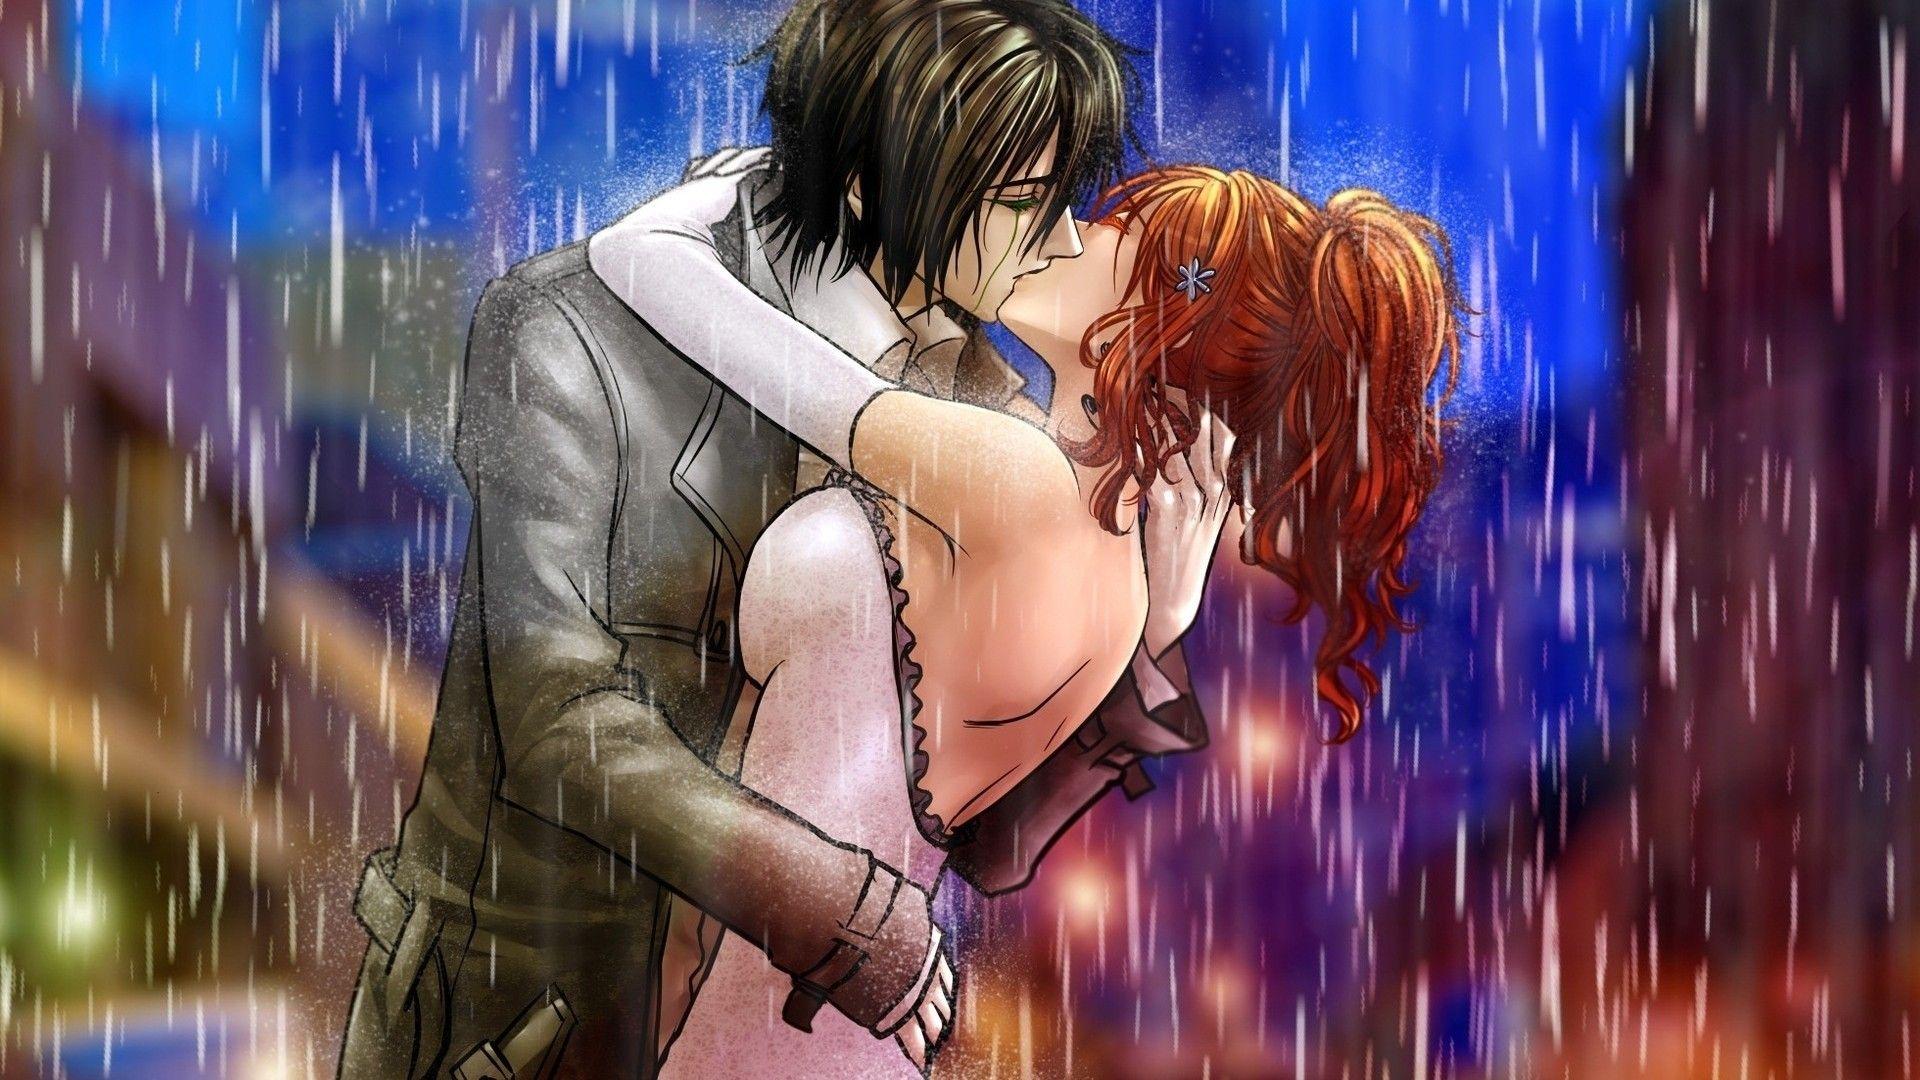 Sweet Kissing And Hugging Anime Wallpapers - Wallpaper Cave